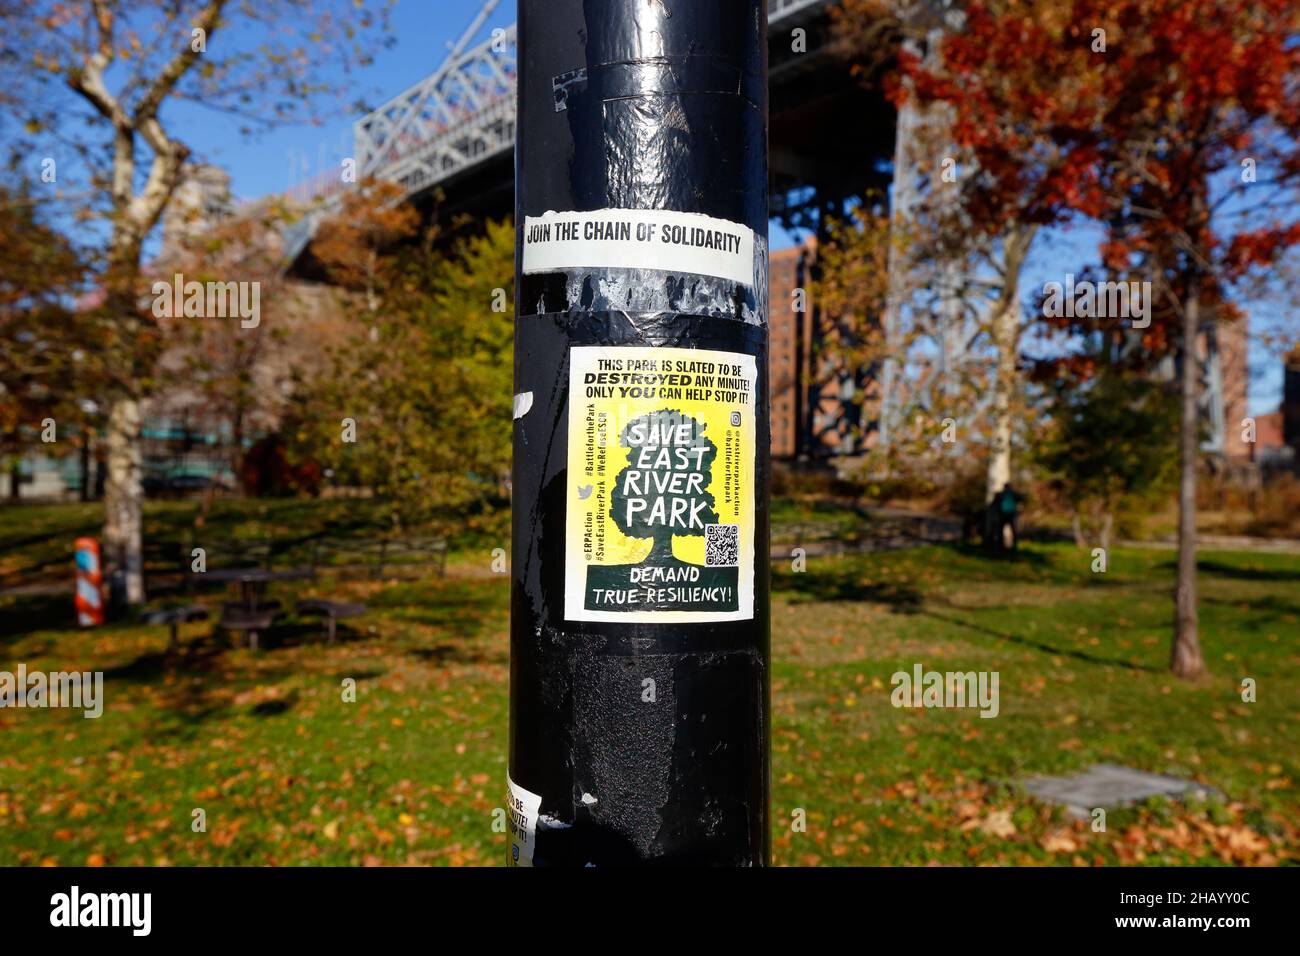 A 'Save East River Park' flyer on a light pole in East River Park, New York. November 23, 2021. [see additional info for full caption] Stock Photo